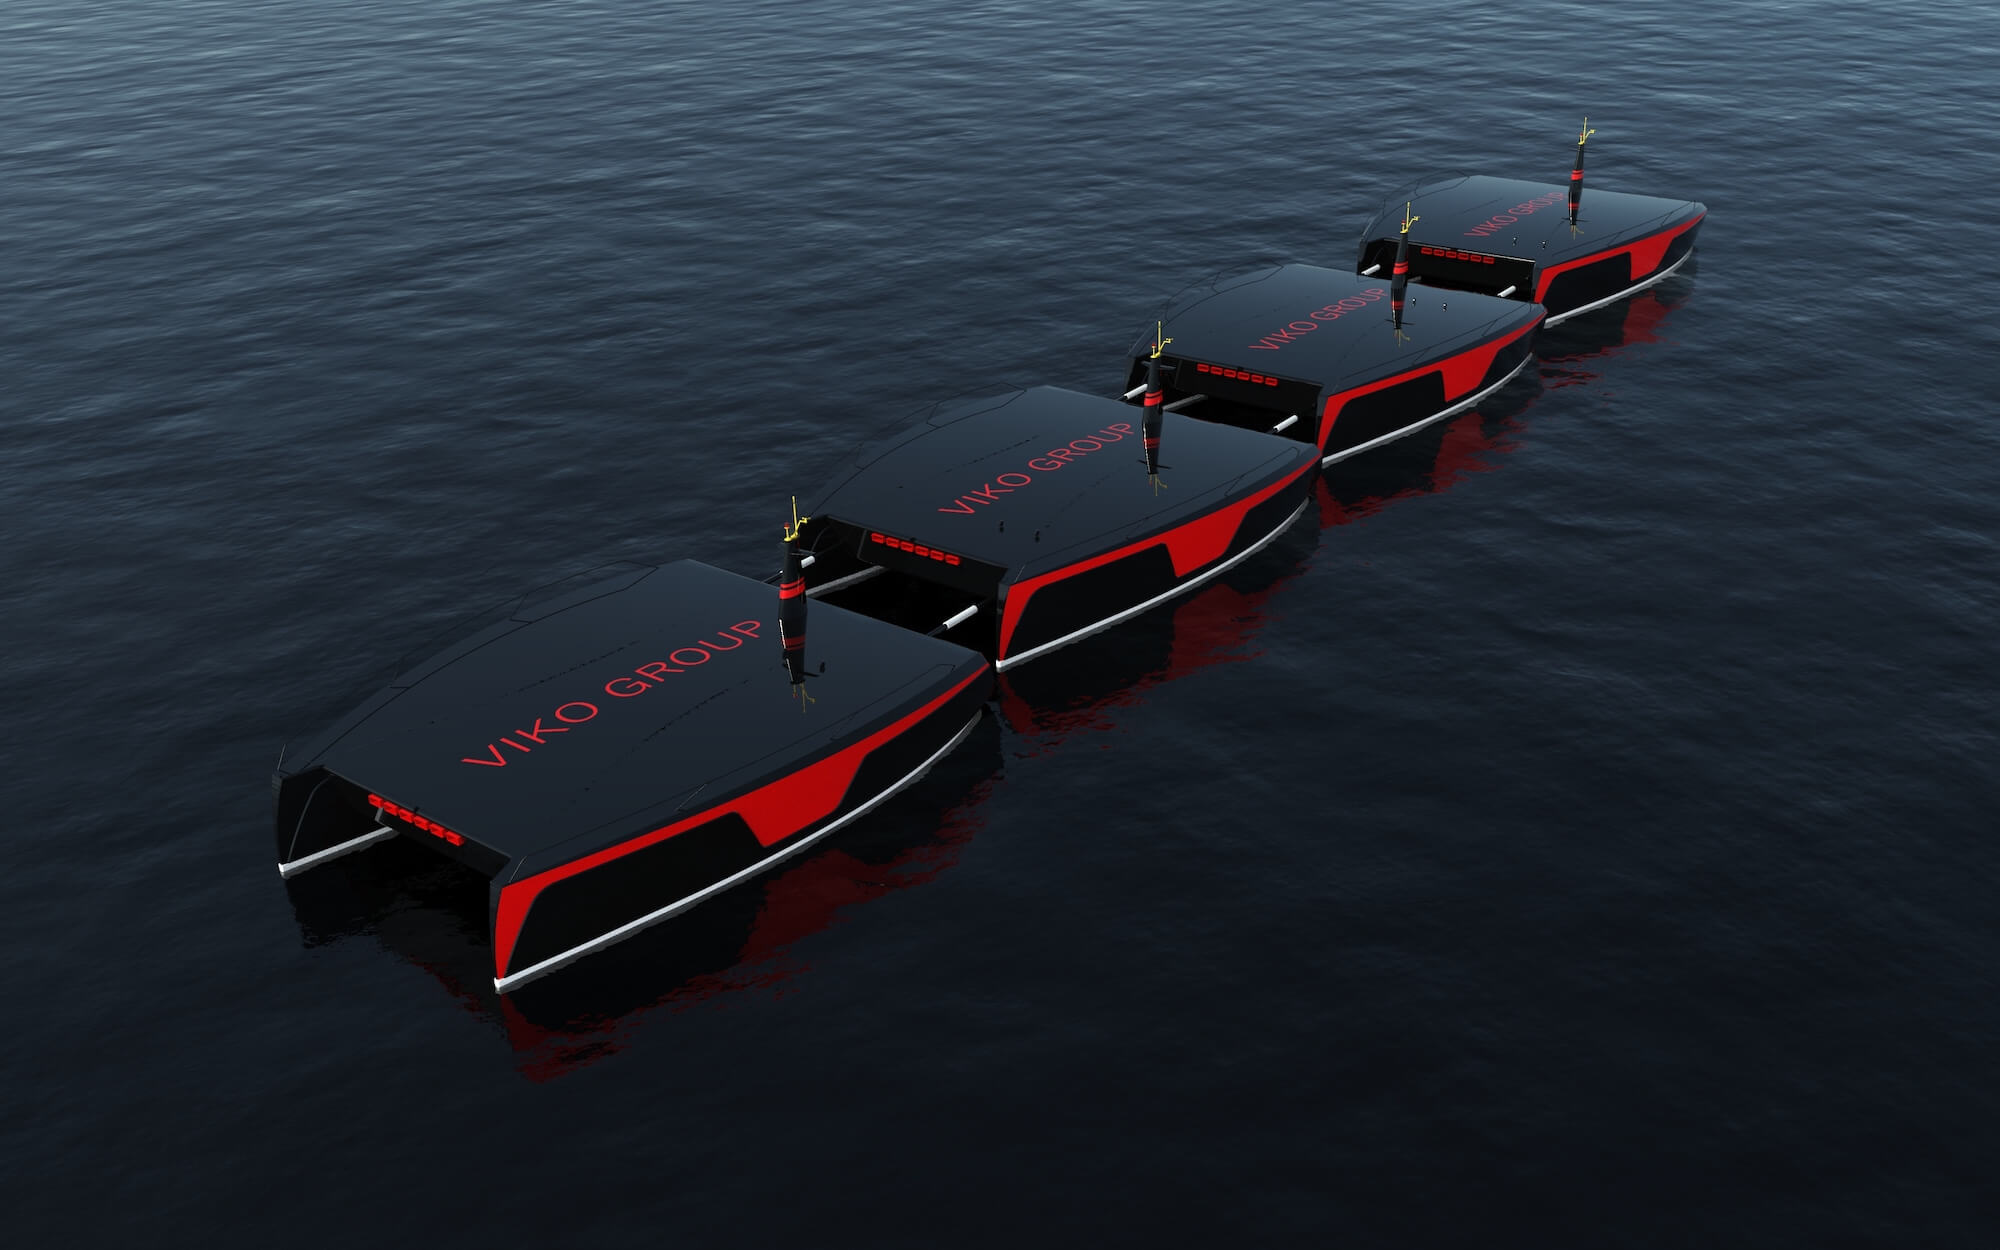 New type of marine energy device in the works